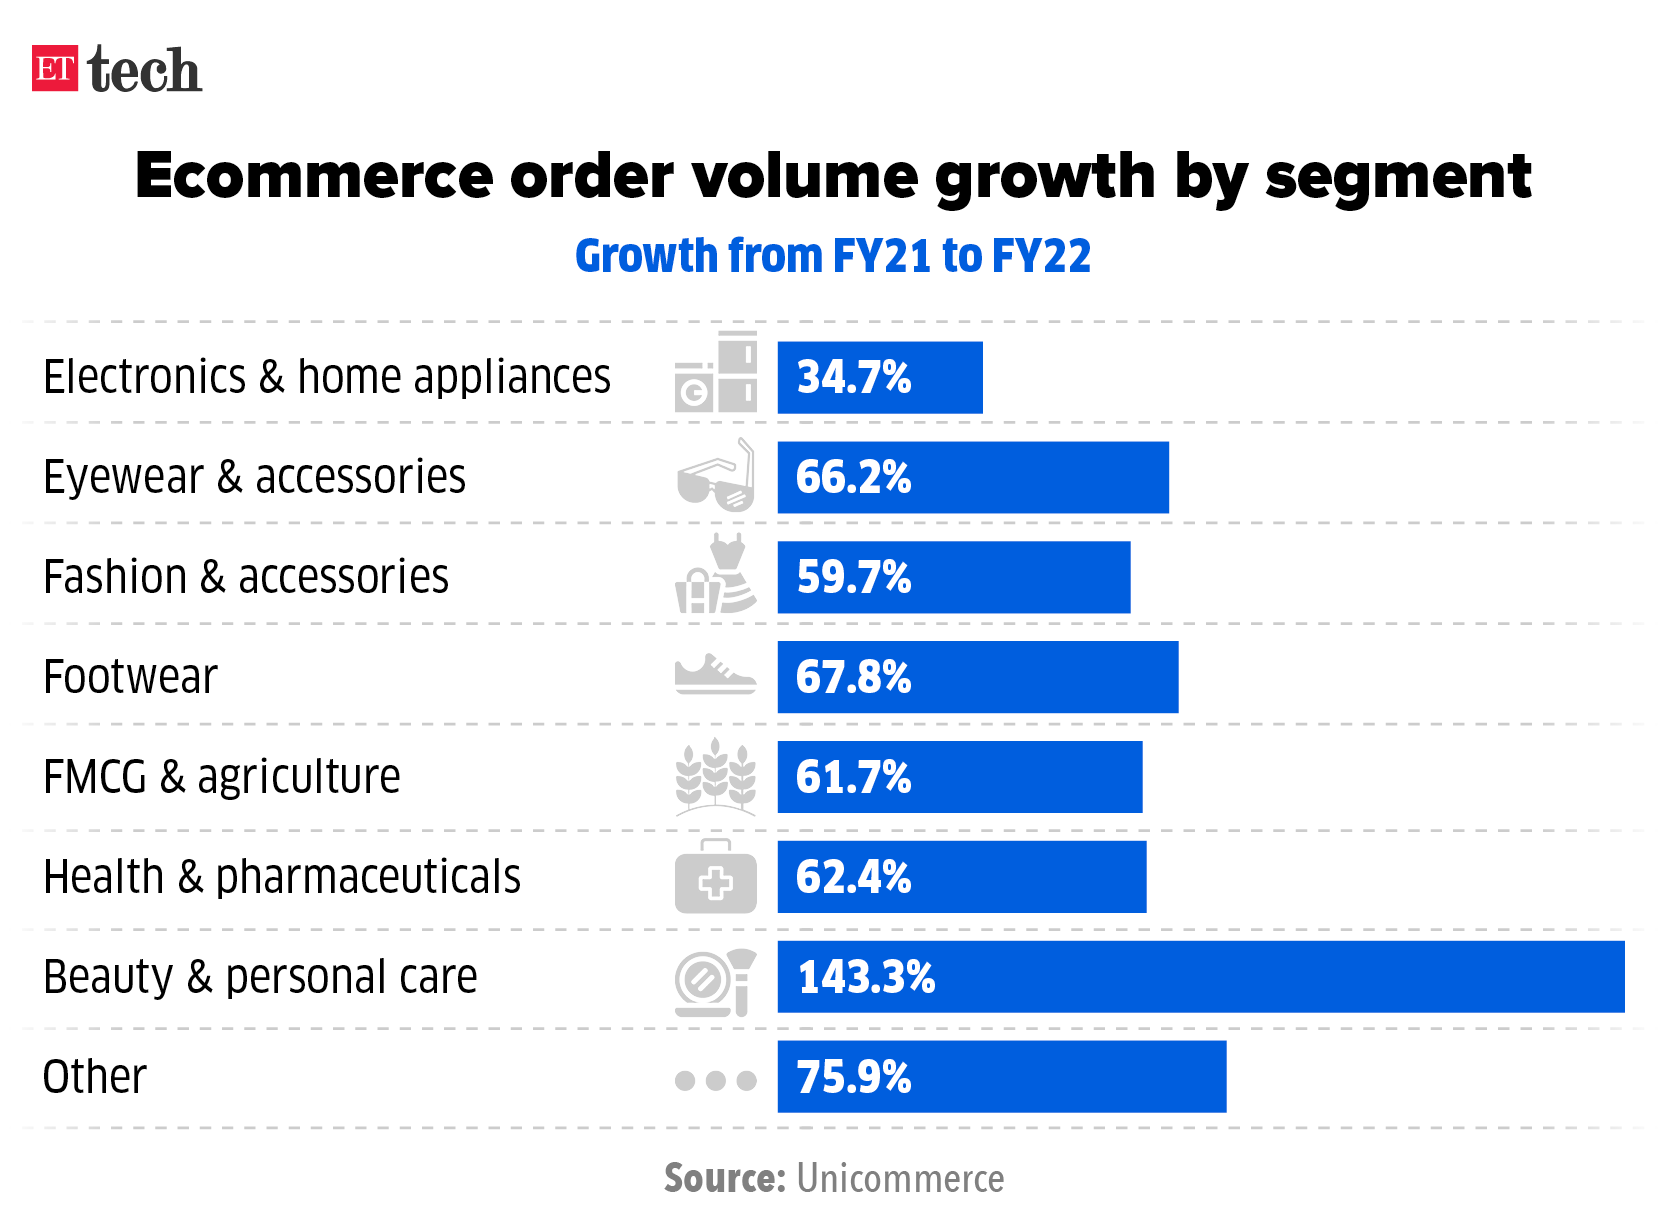 Ecommerce order volume growth